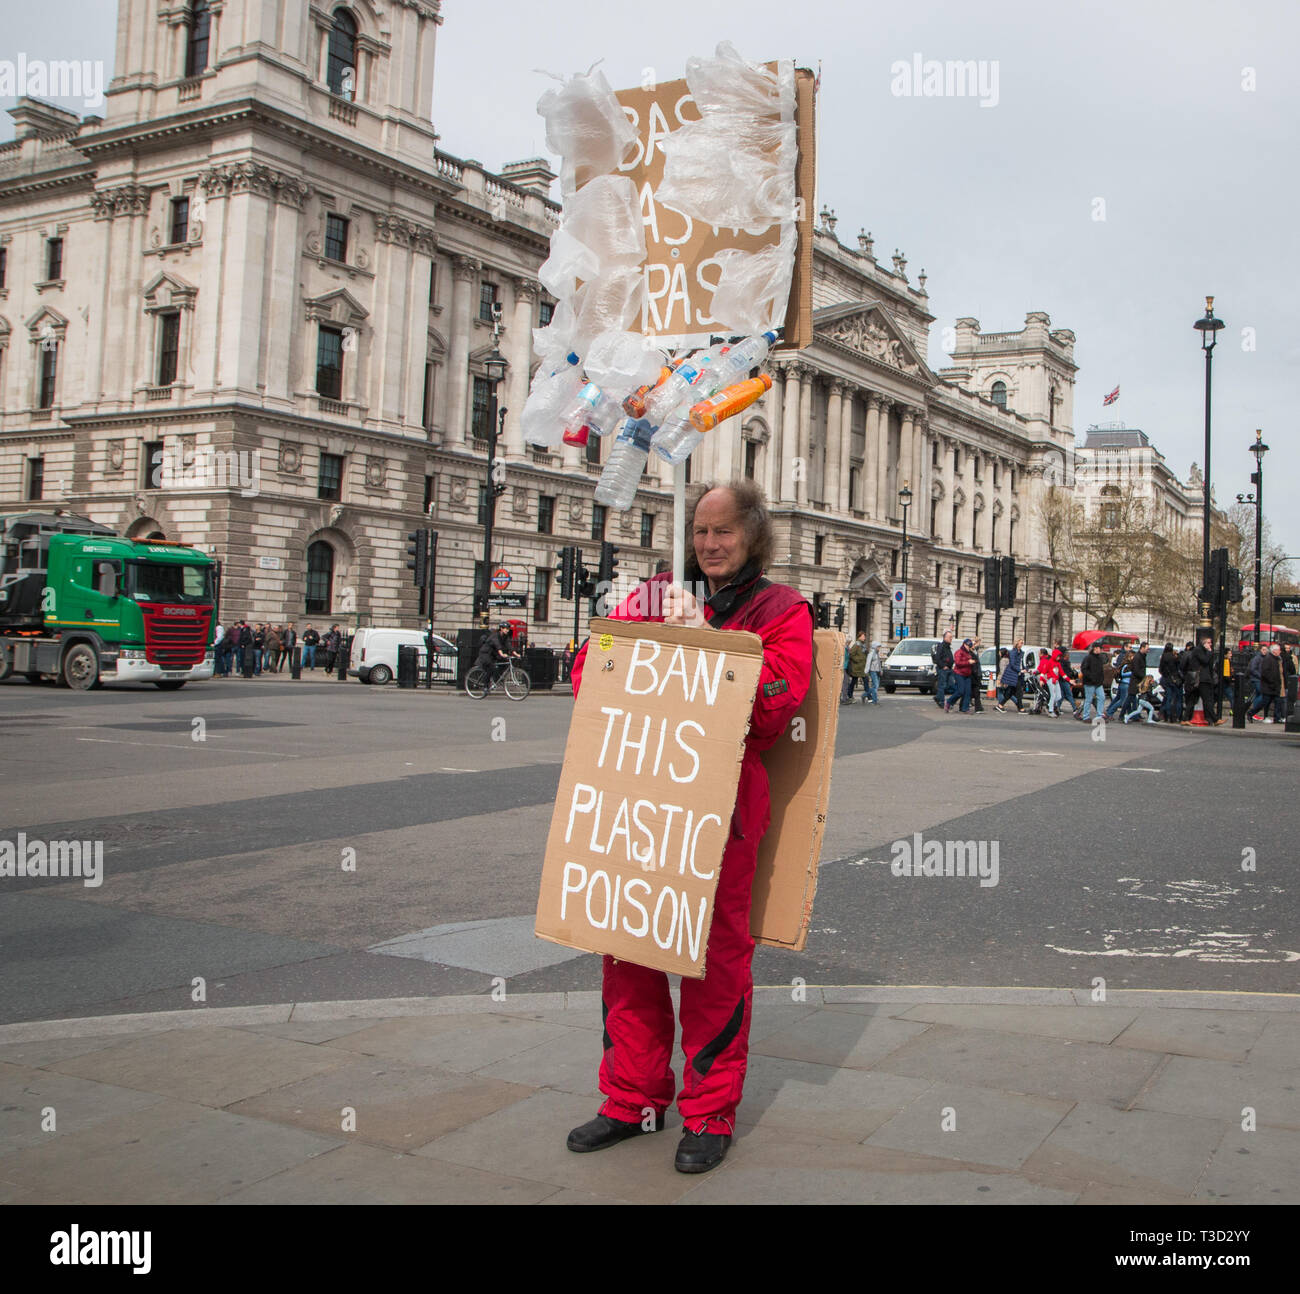 A man protesting against the use of plastic Stock Photo